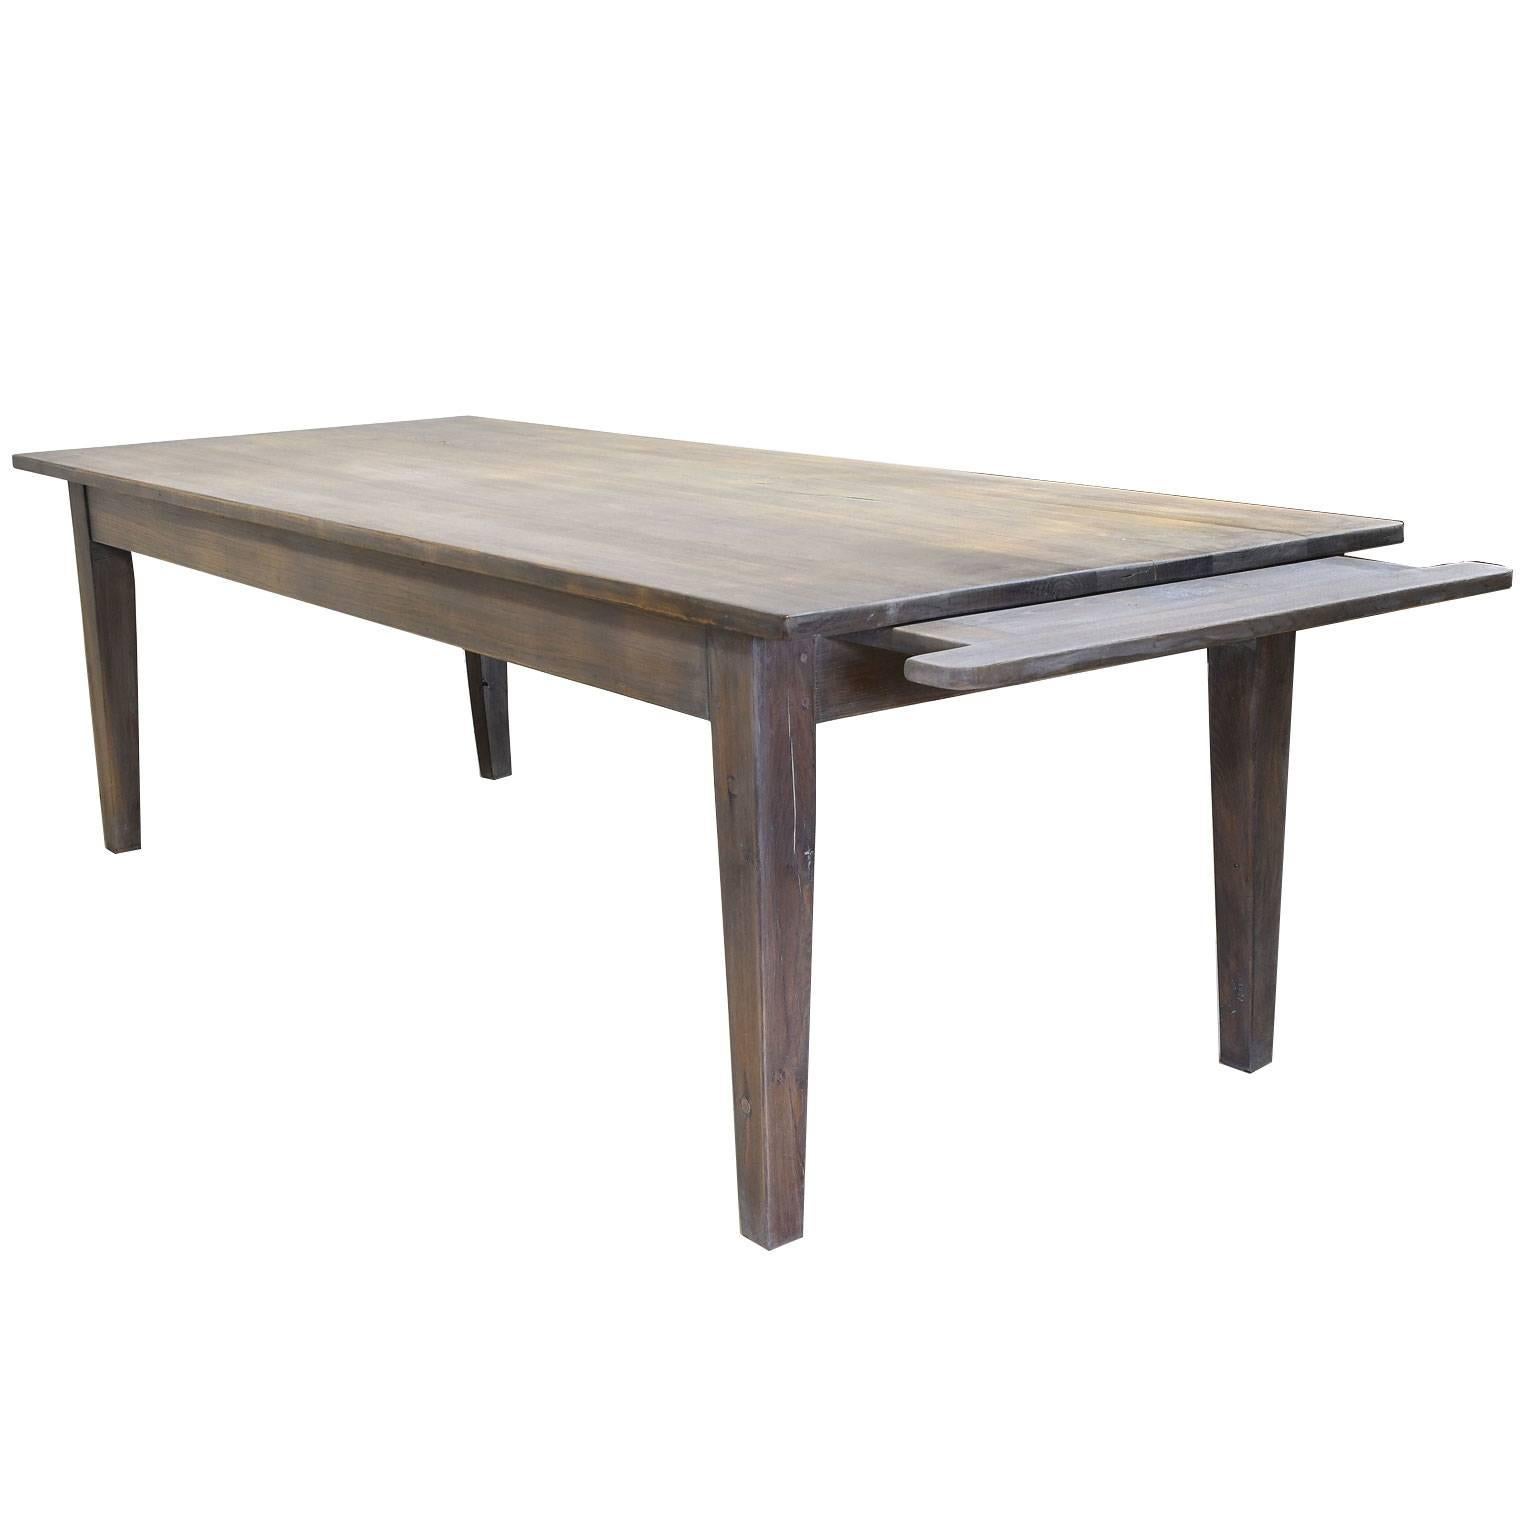 Late 20th Century Farmhouse Dining or Kitchen Table in Re-Purposed Oak with Fumed-Taupe Finish